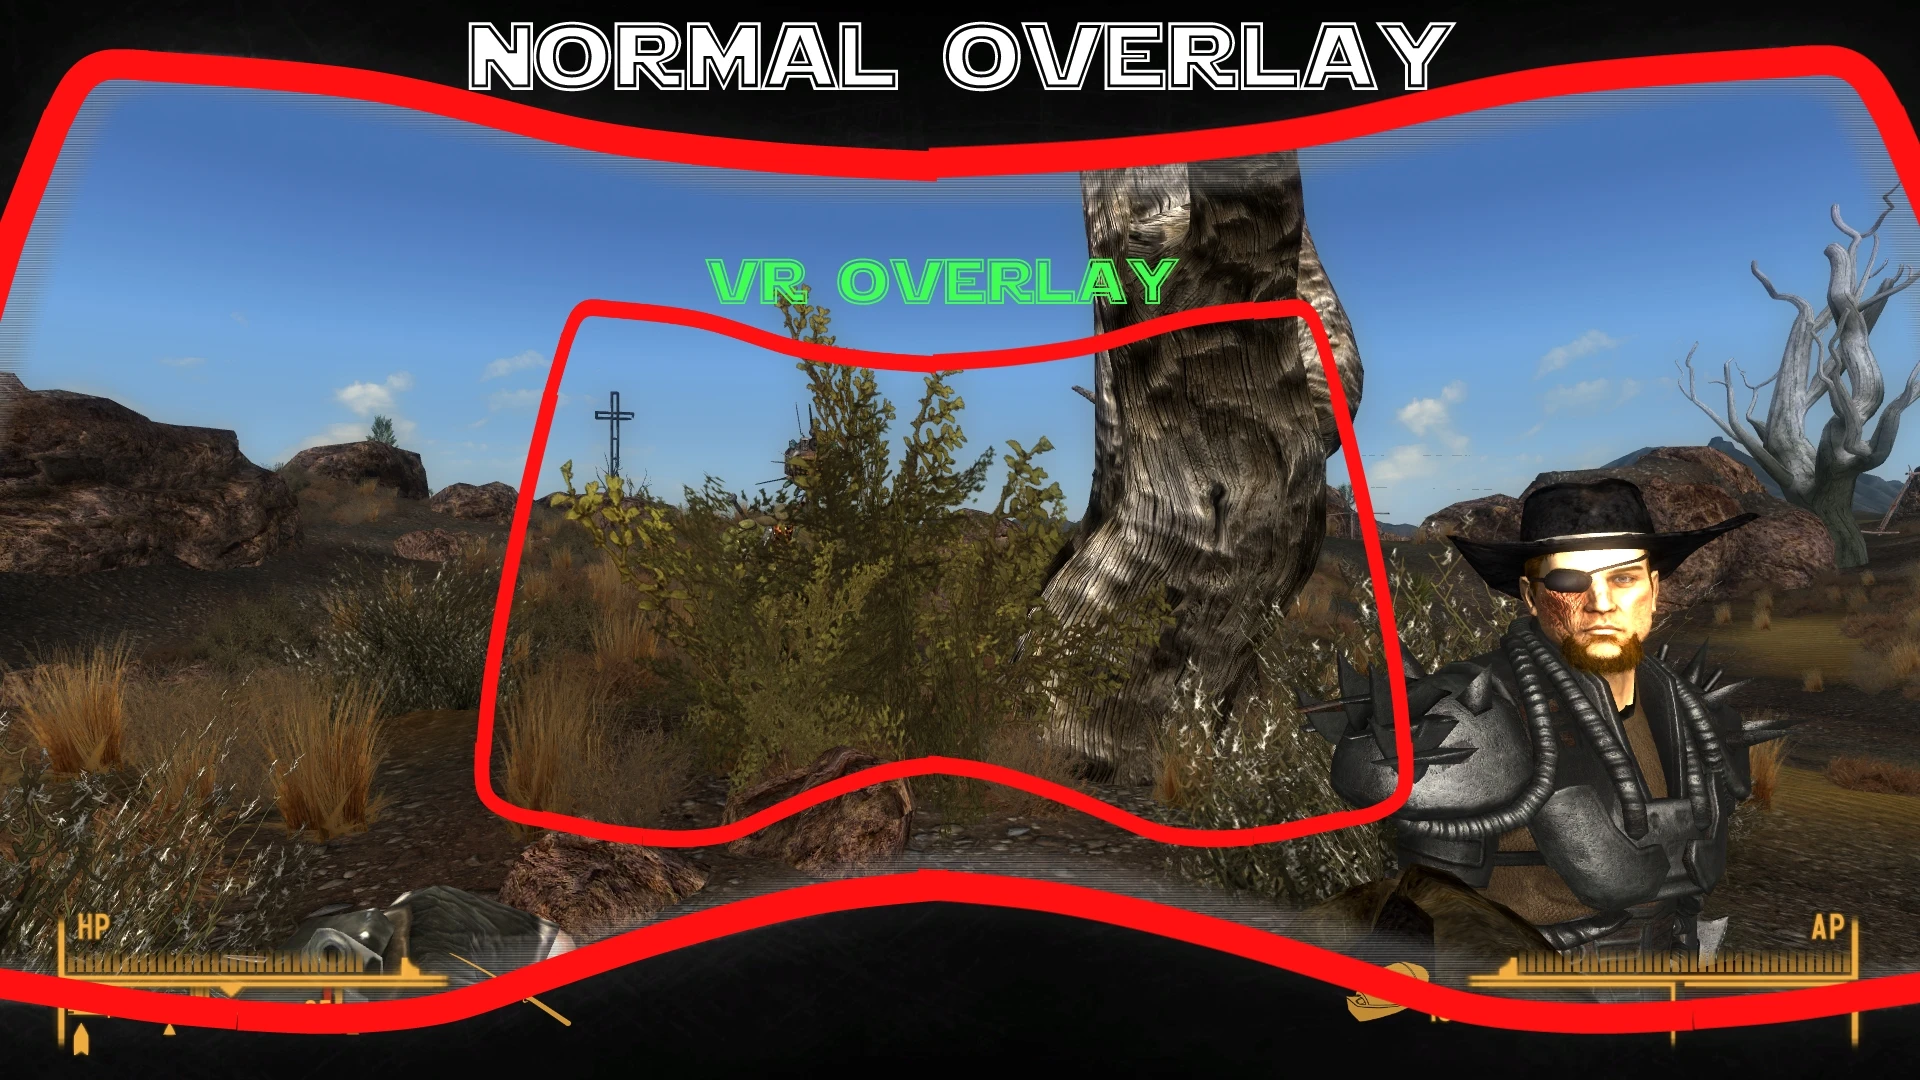 Rough sleep Forbedre Framework Normal Project Nevda Overlay Vs VR Overlay at Fallout New Vegas - mods and  community